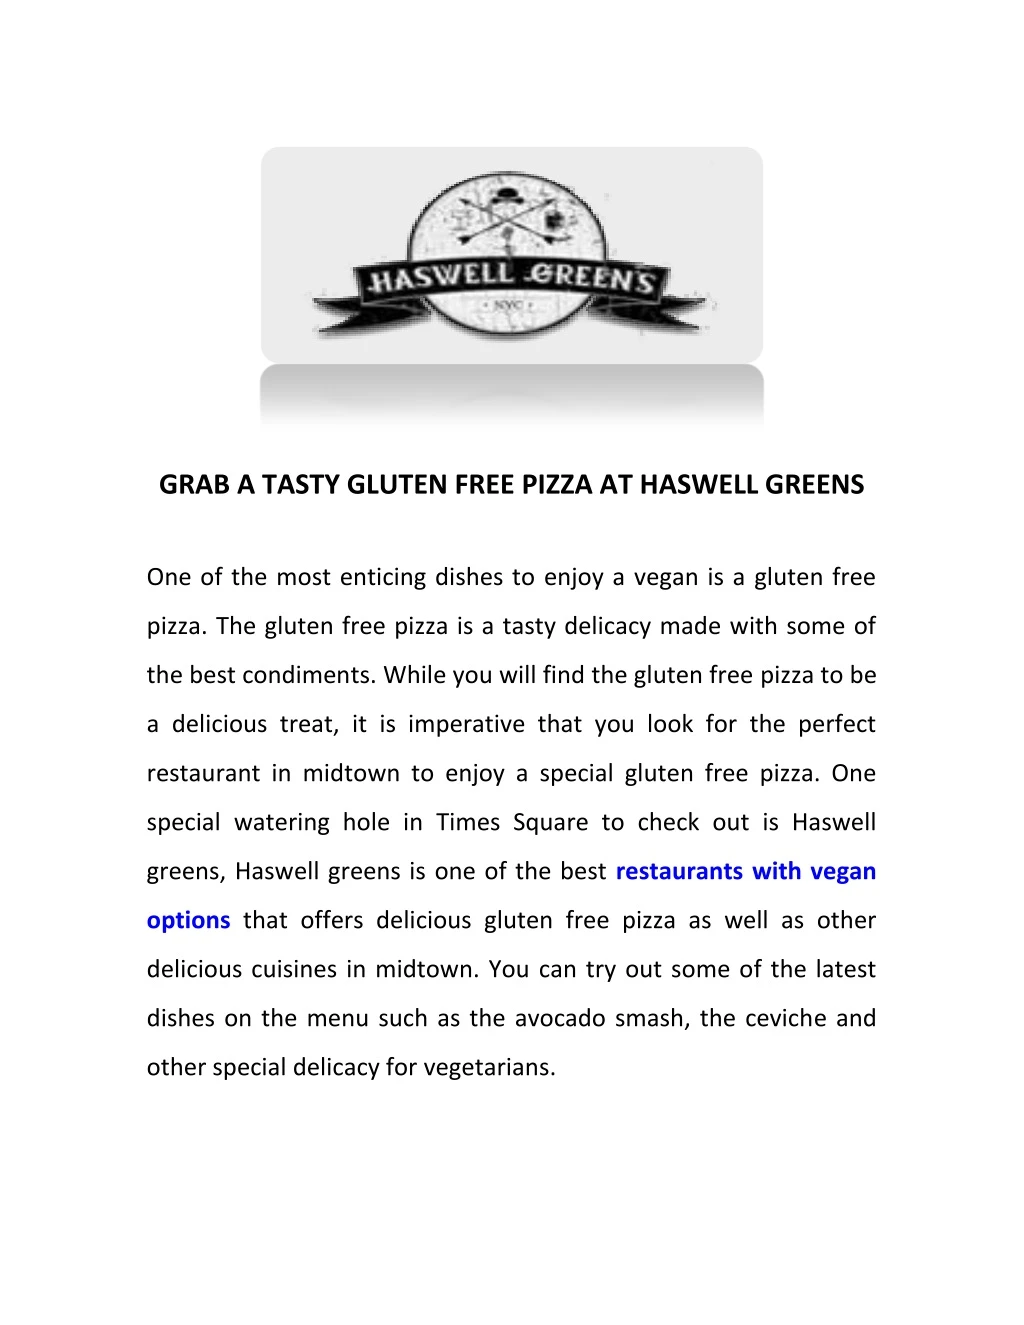 grab a tasty gluten free pizza at haswell greens